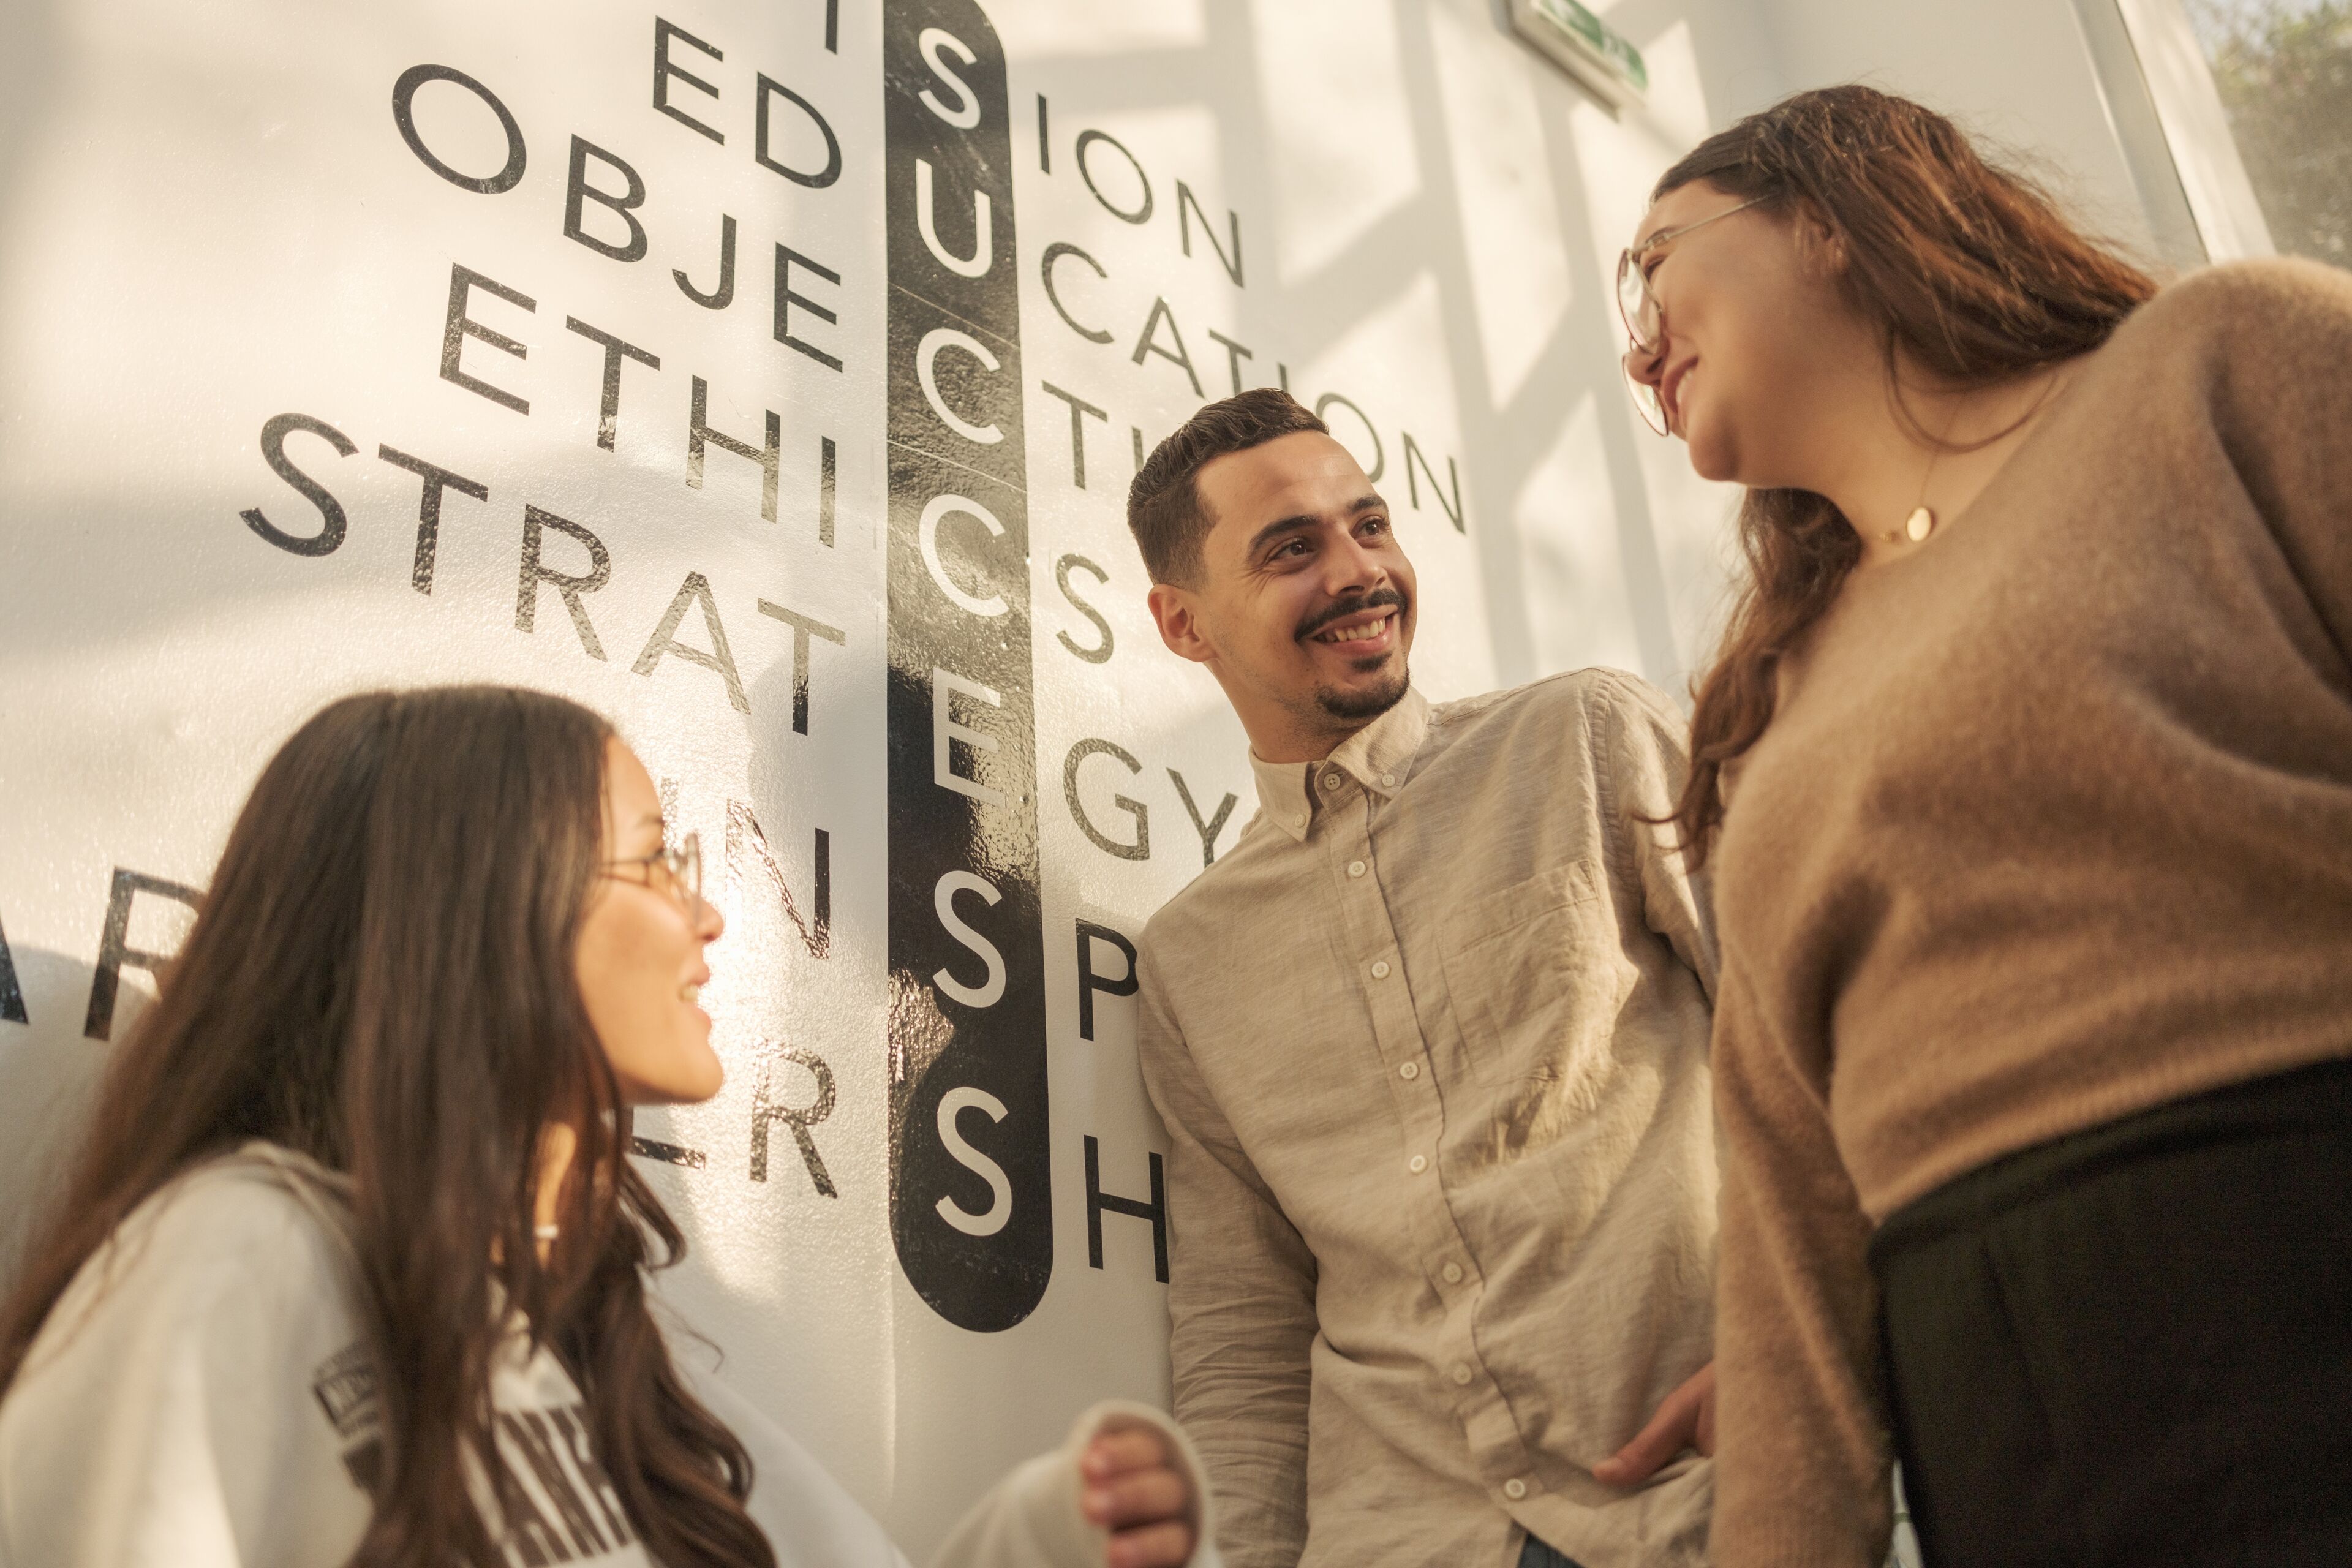 Three students converse joyfully in front of a wall with educational words.